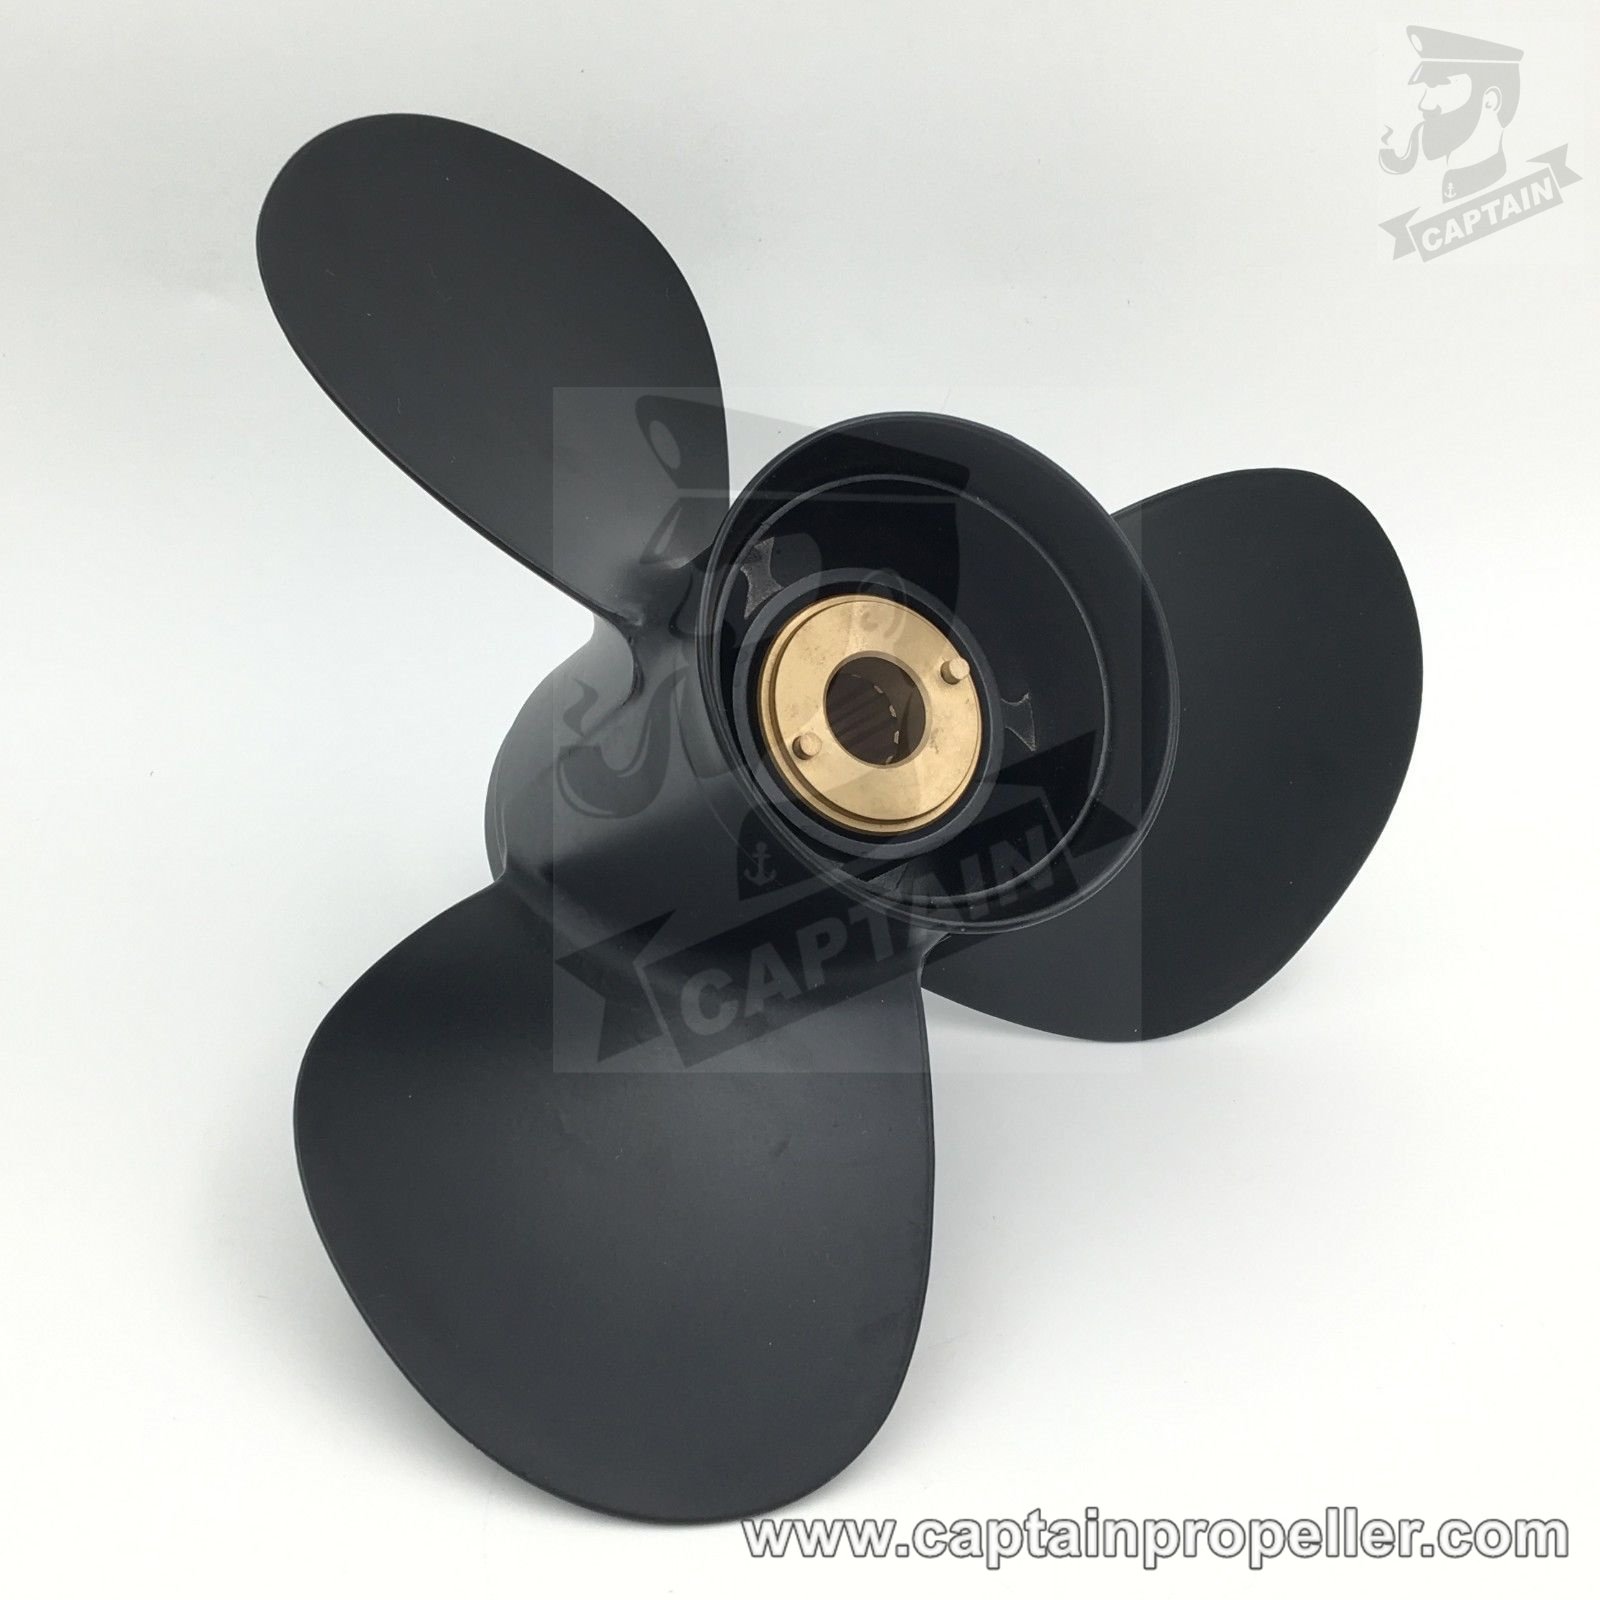 13.75 x 15 Aluminum Outboard Propeller For Mercury 60-115HP